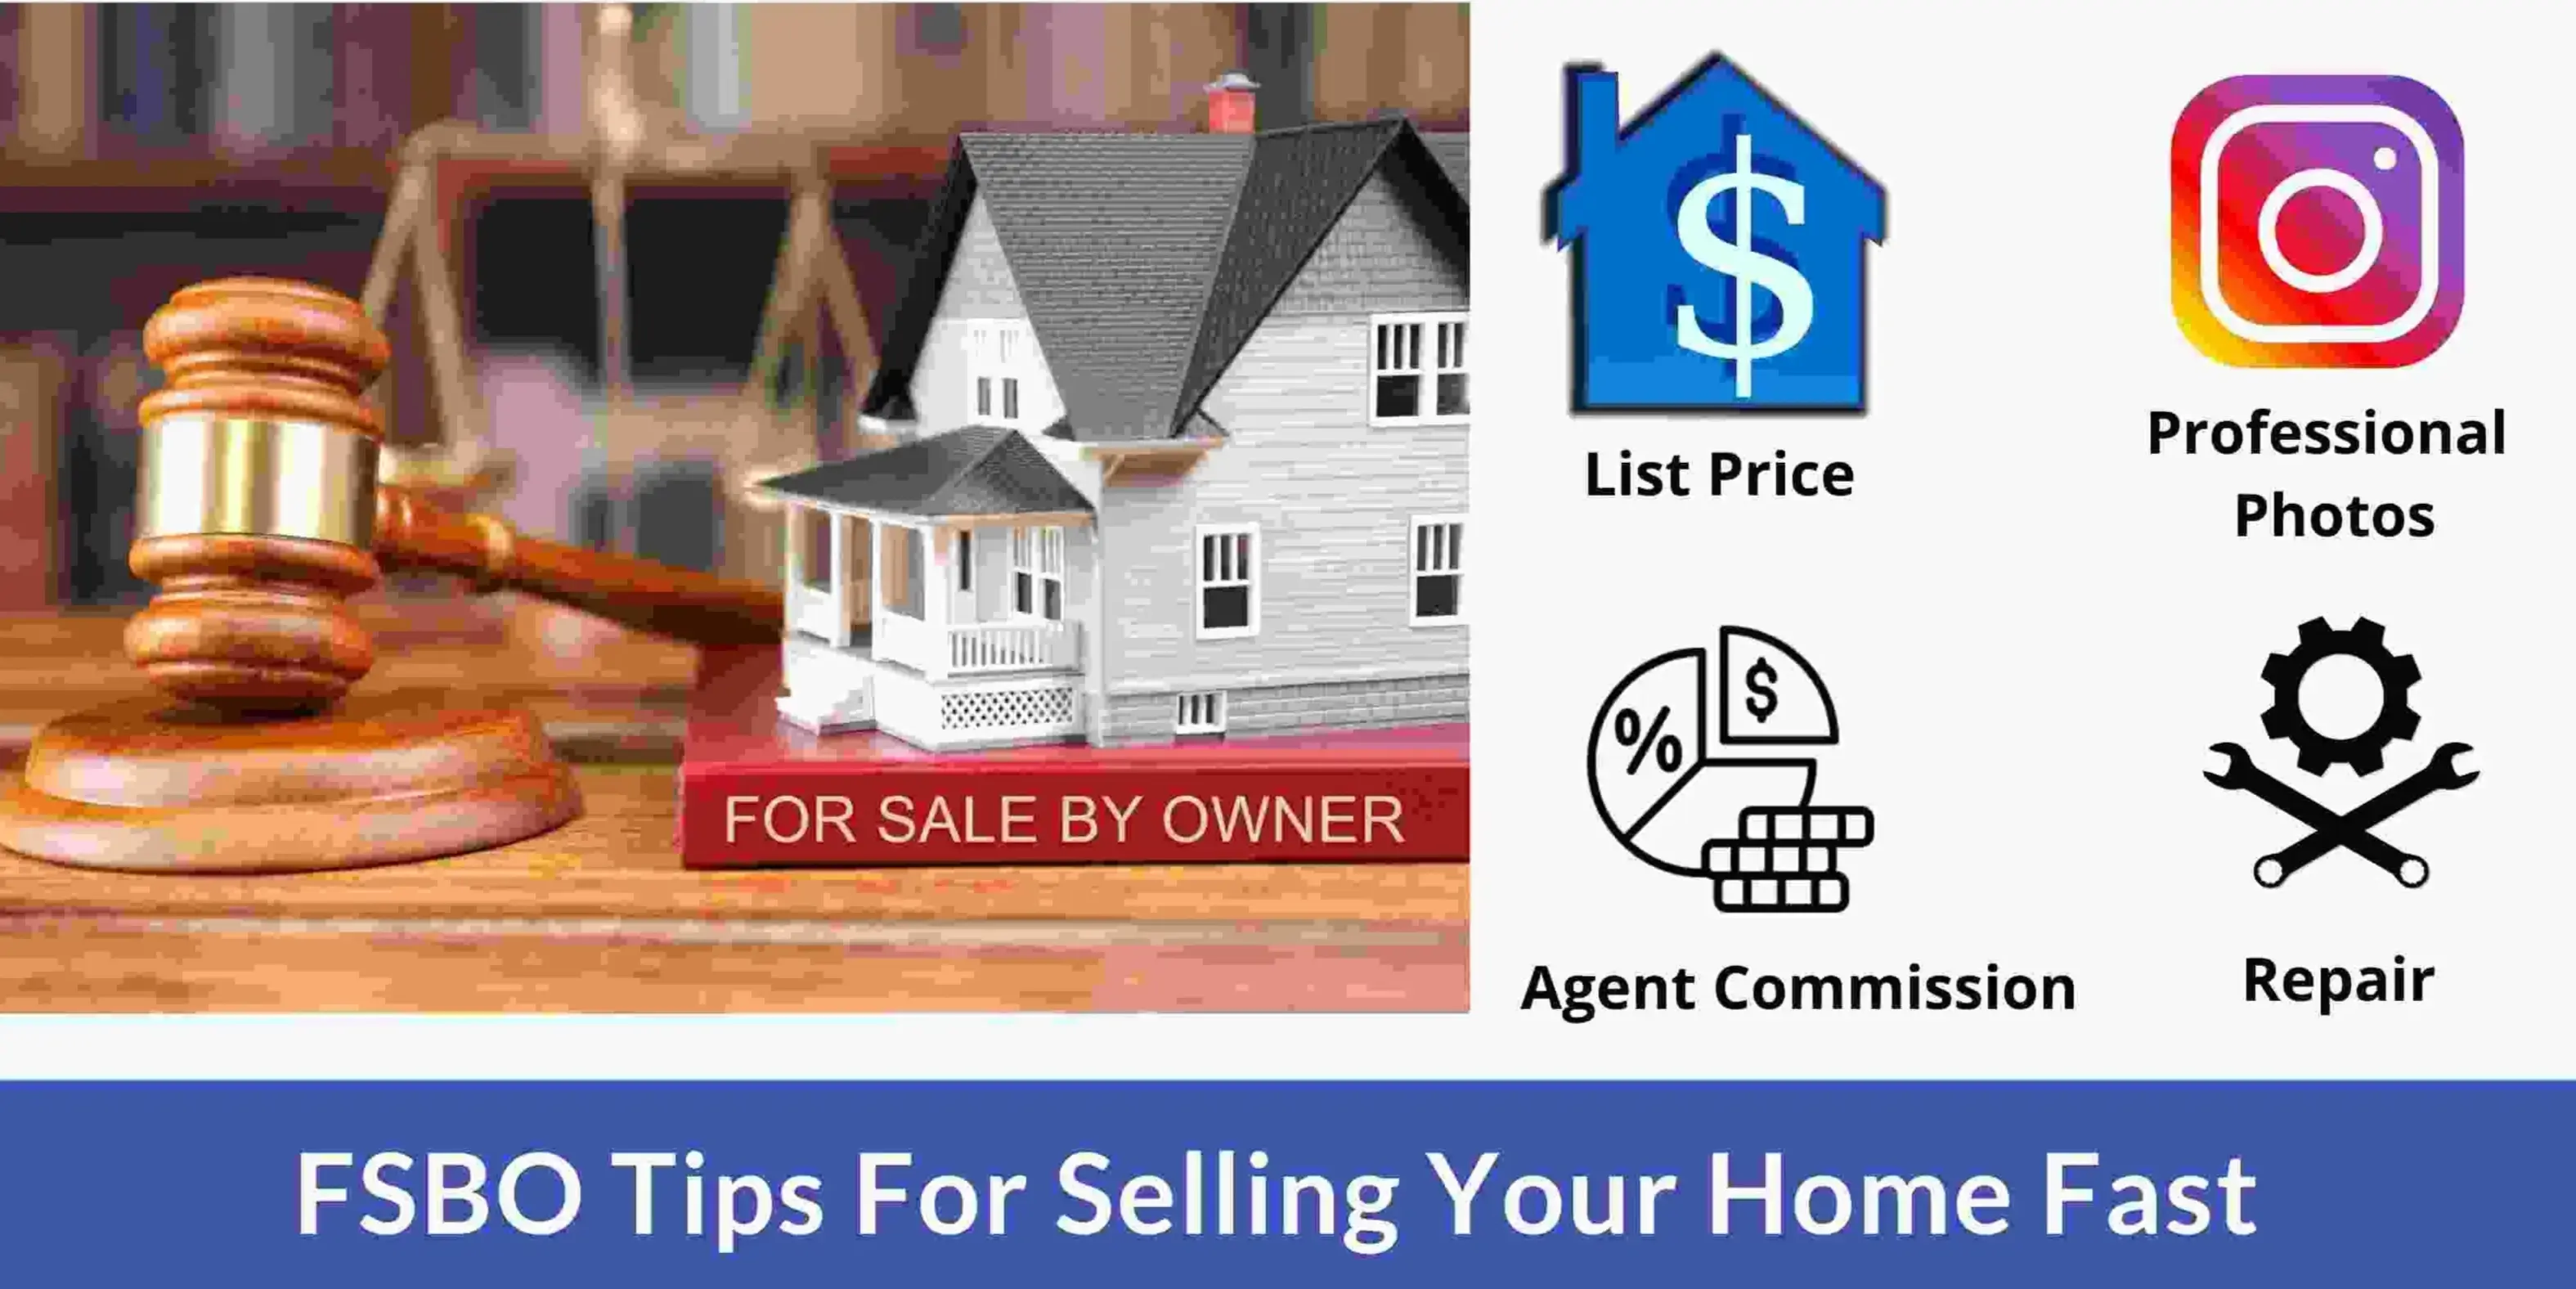 FSBO Tips For Selling Your Home Fast